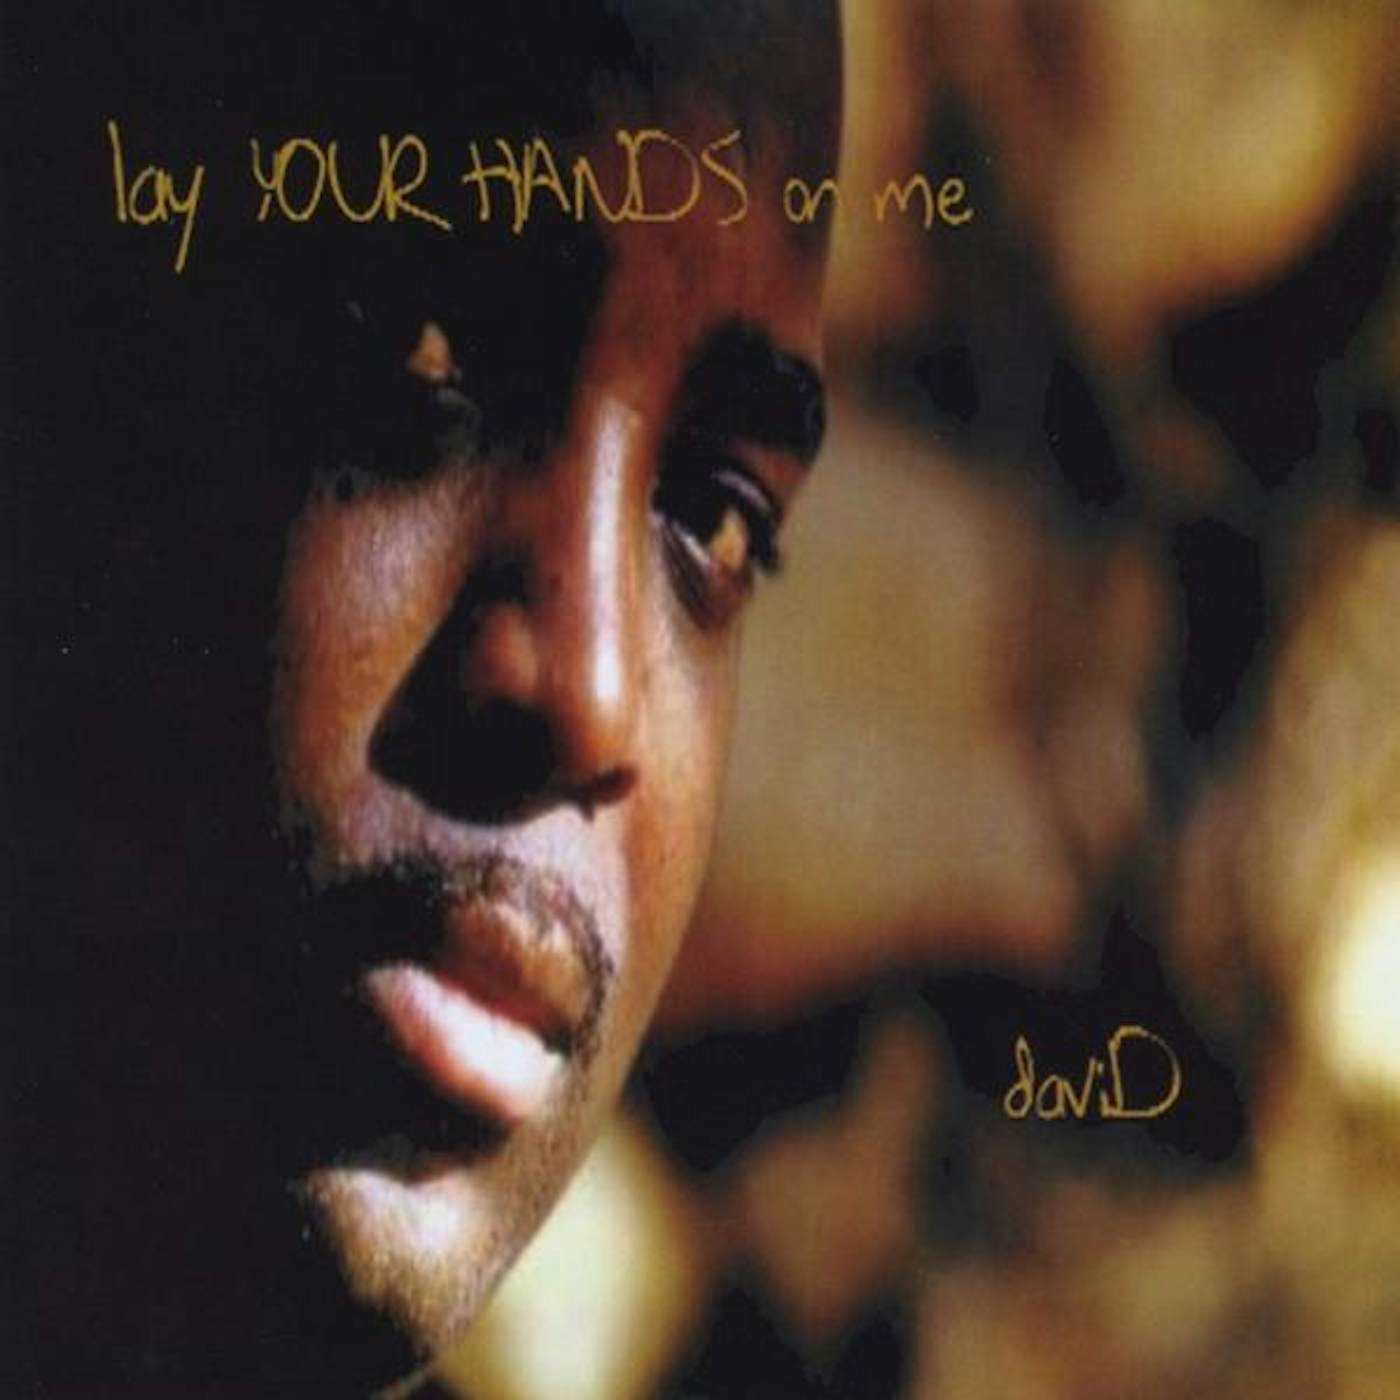 David LAY YOUR HANDS ON ME CD